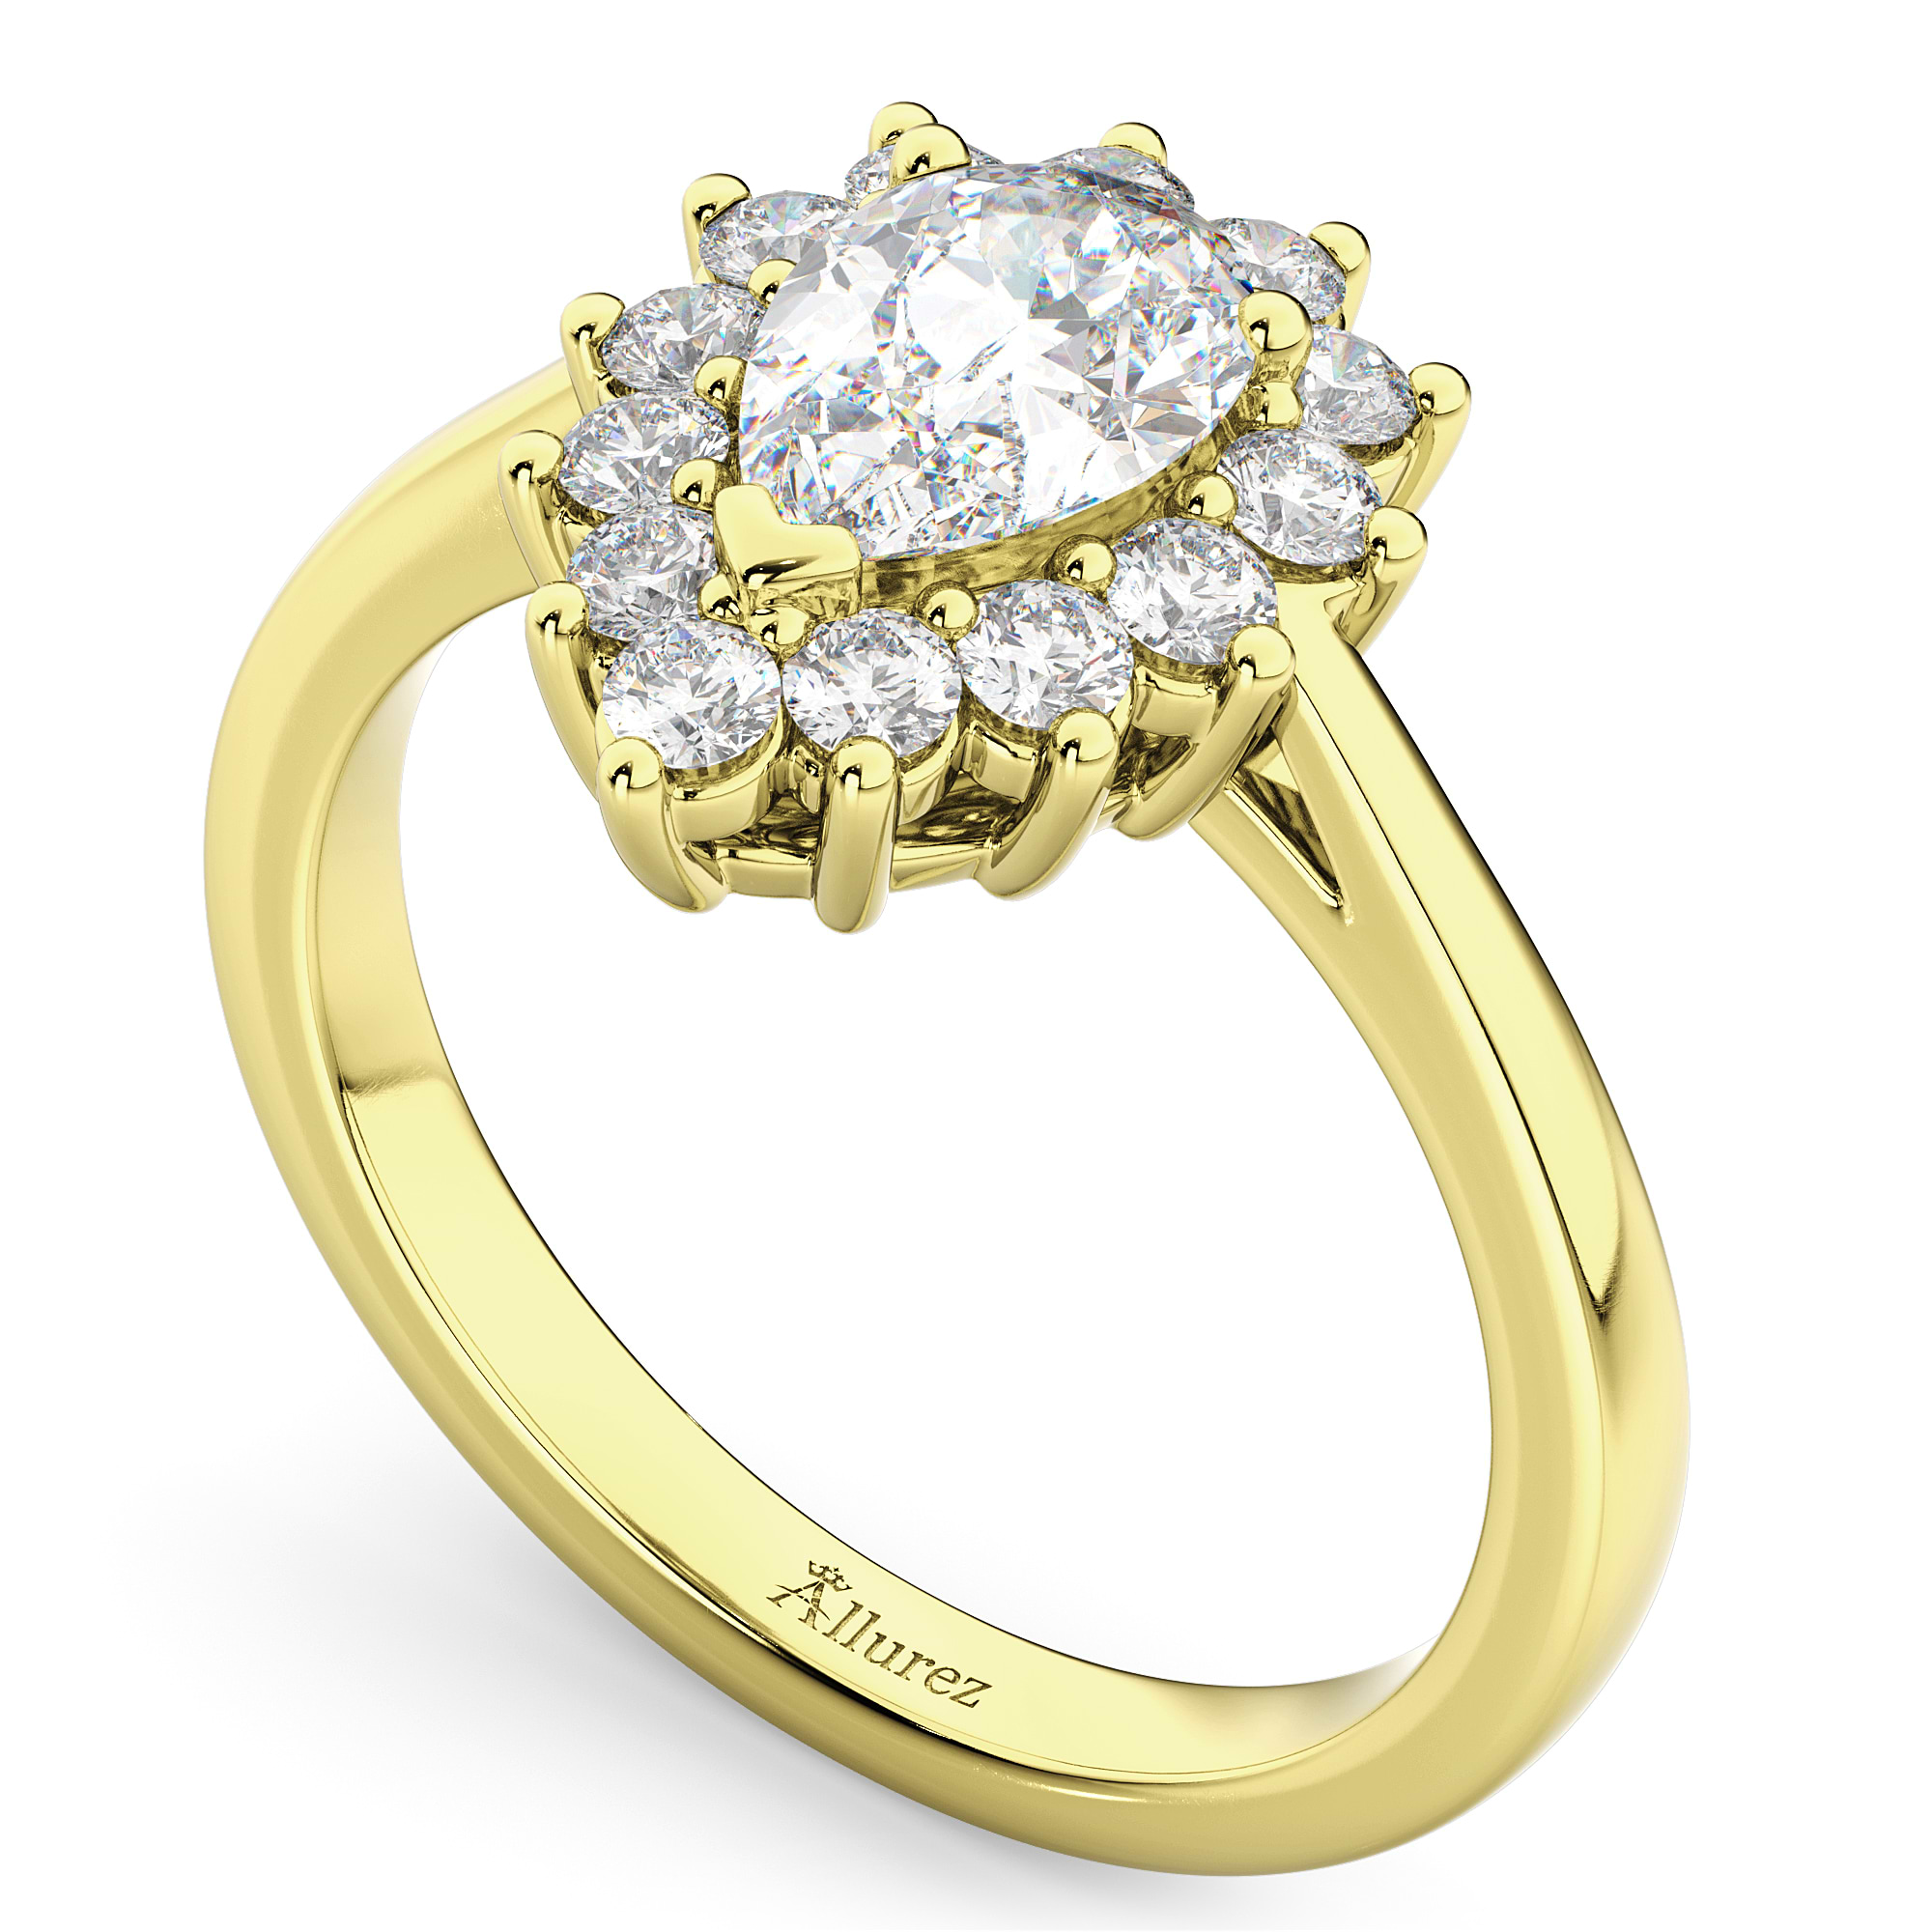 Halo Pear Shaped Diamond Engagement Ring 14k Yellow Gold (1.12ct)